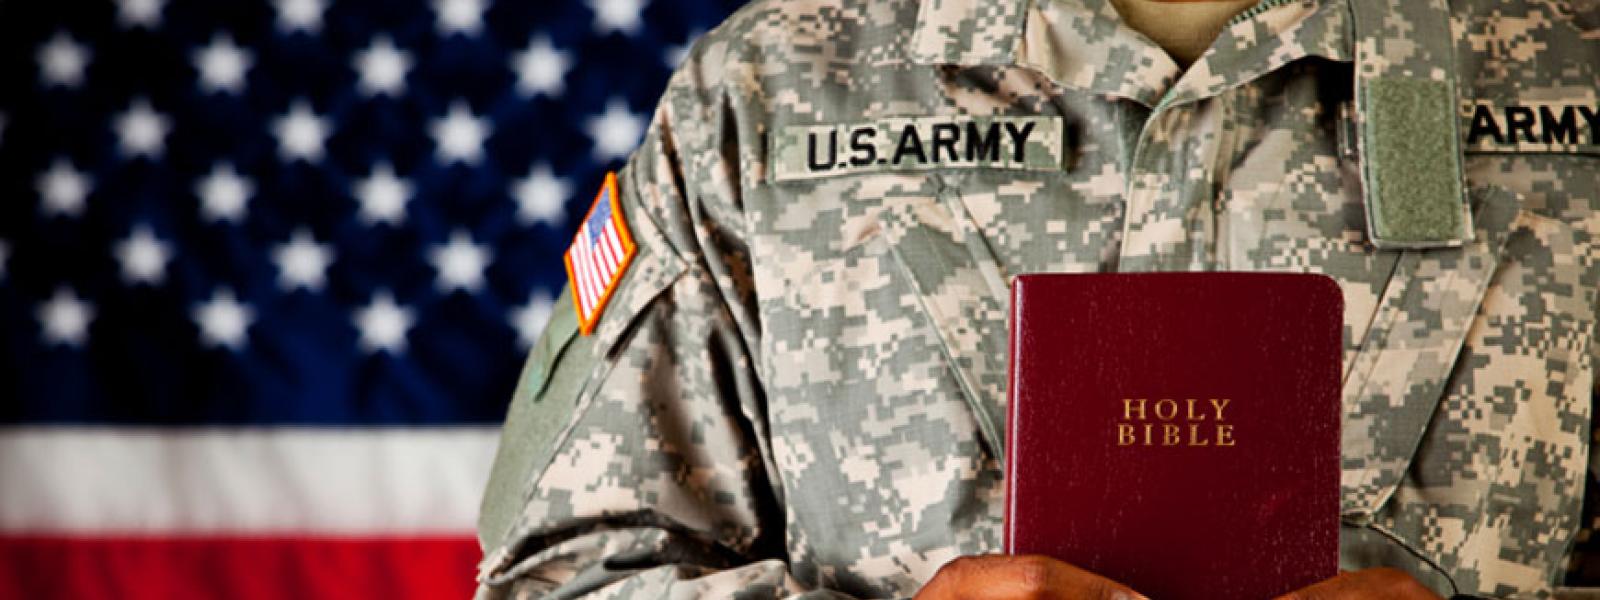 Soldier Black Holding Bible